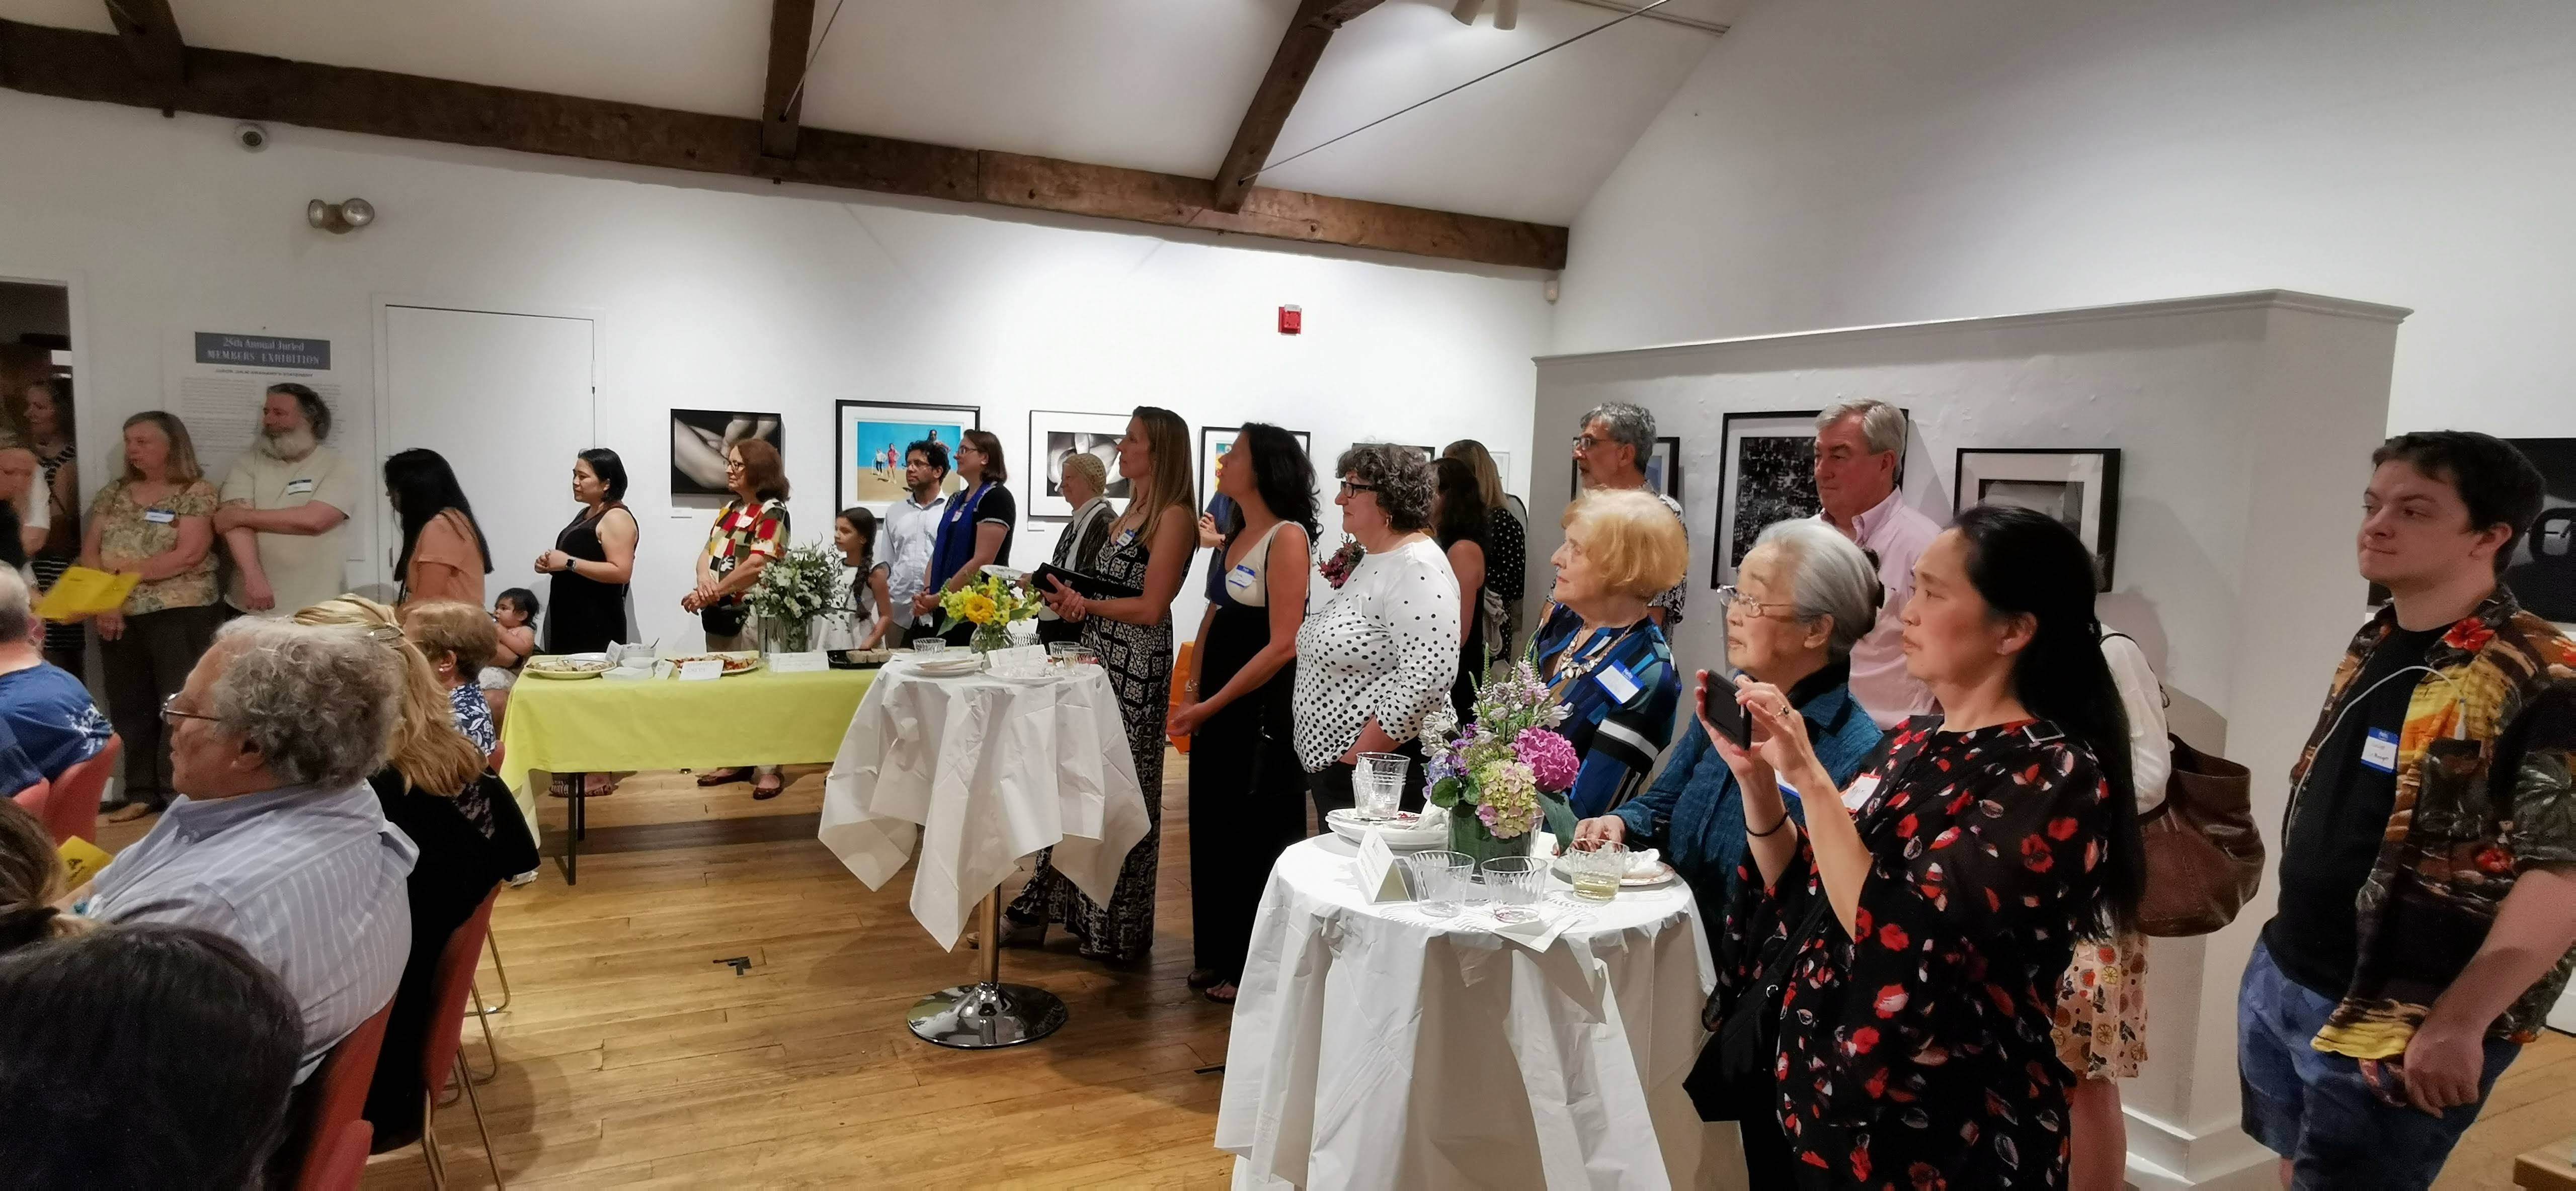 Guests at Art in August Gala Reception 2019